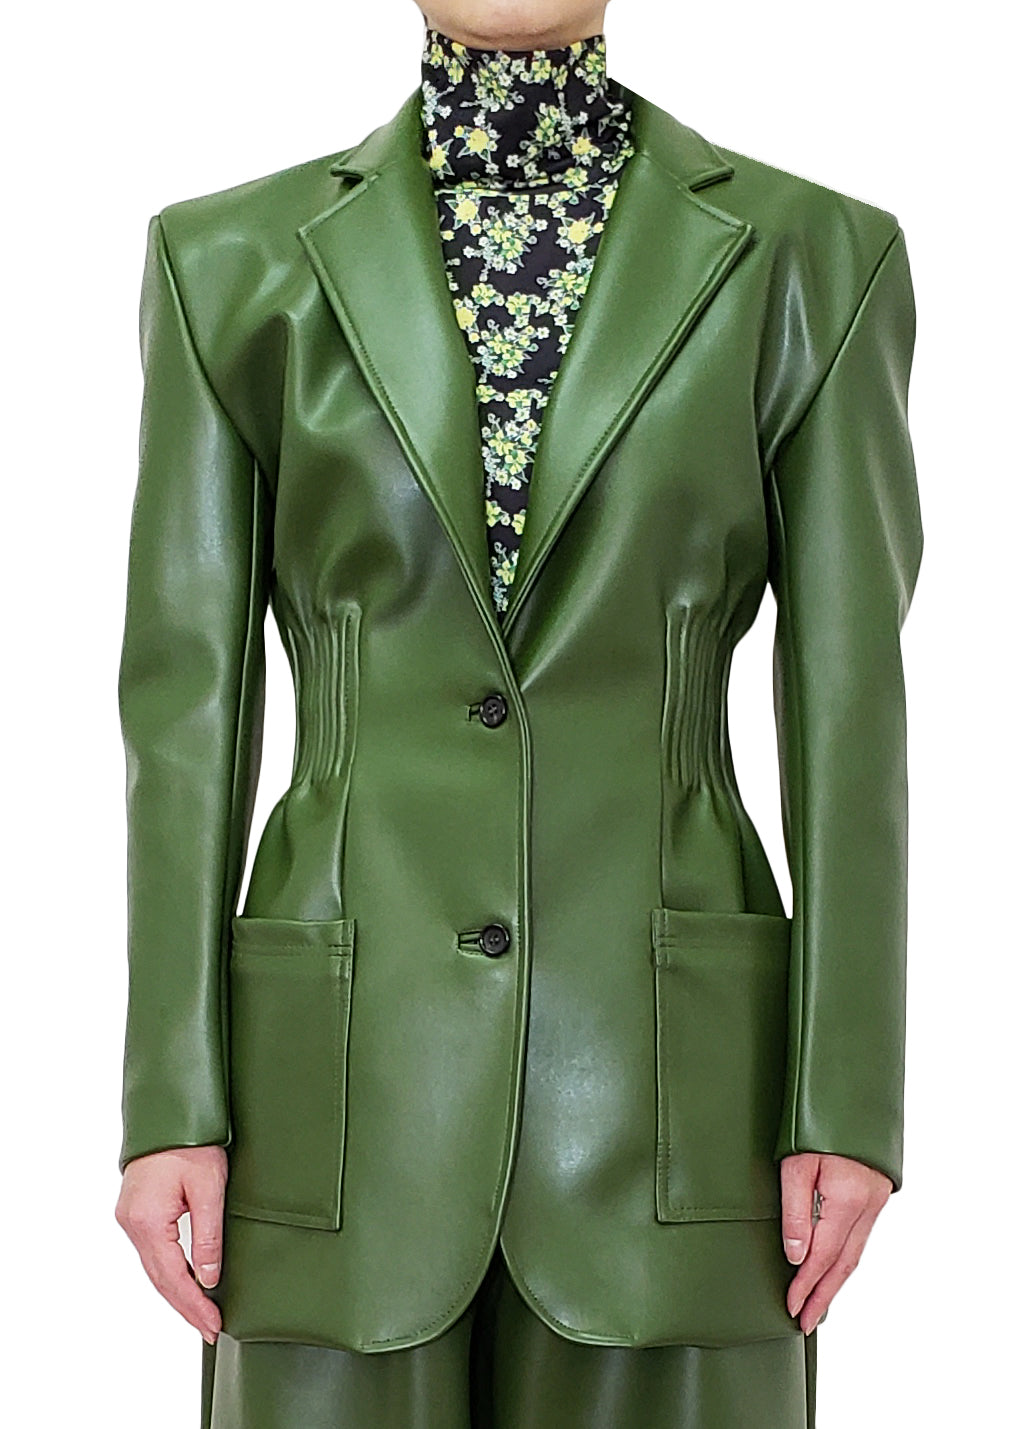 Cactus leather Jacket with elastic waist detail